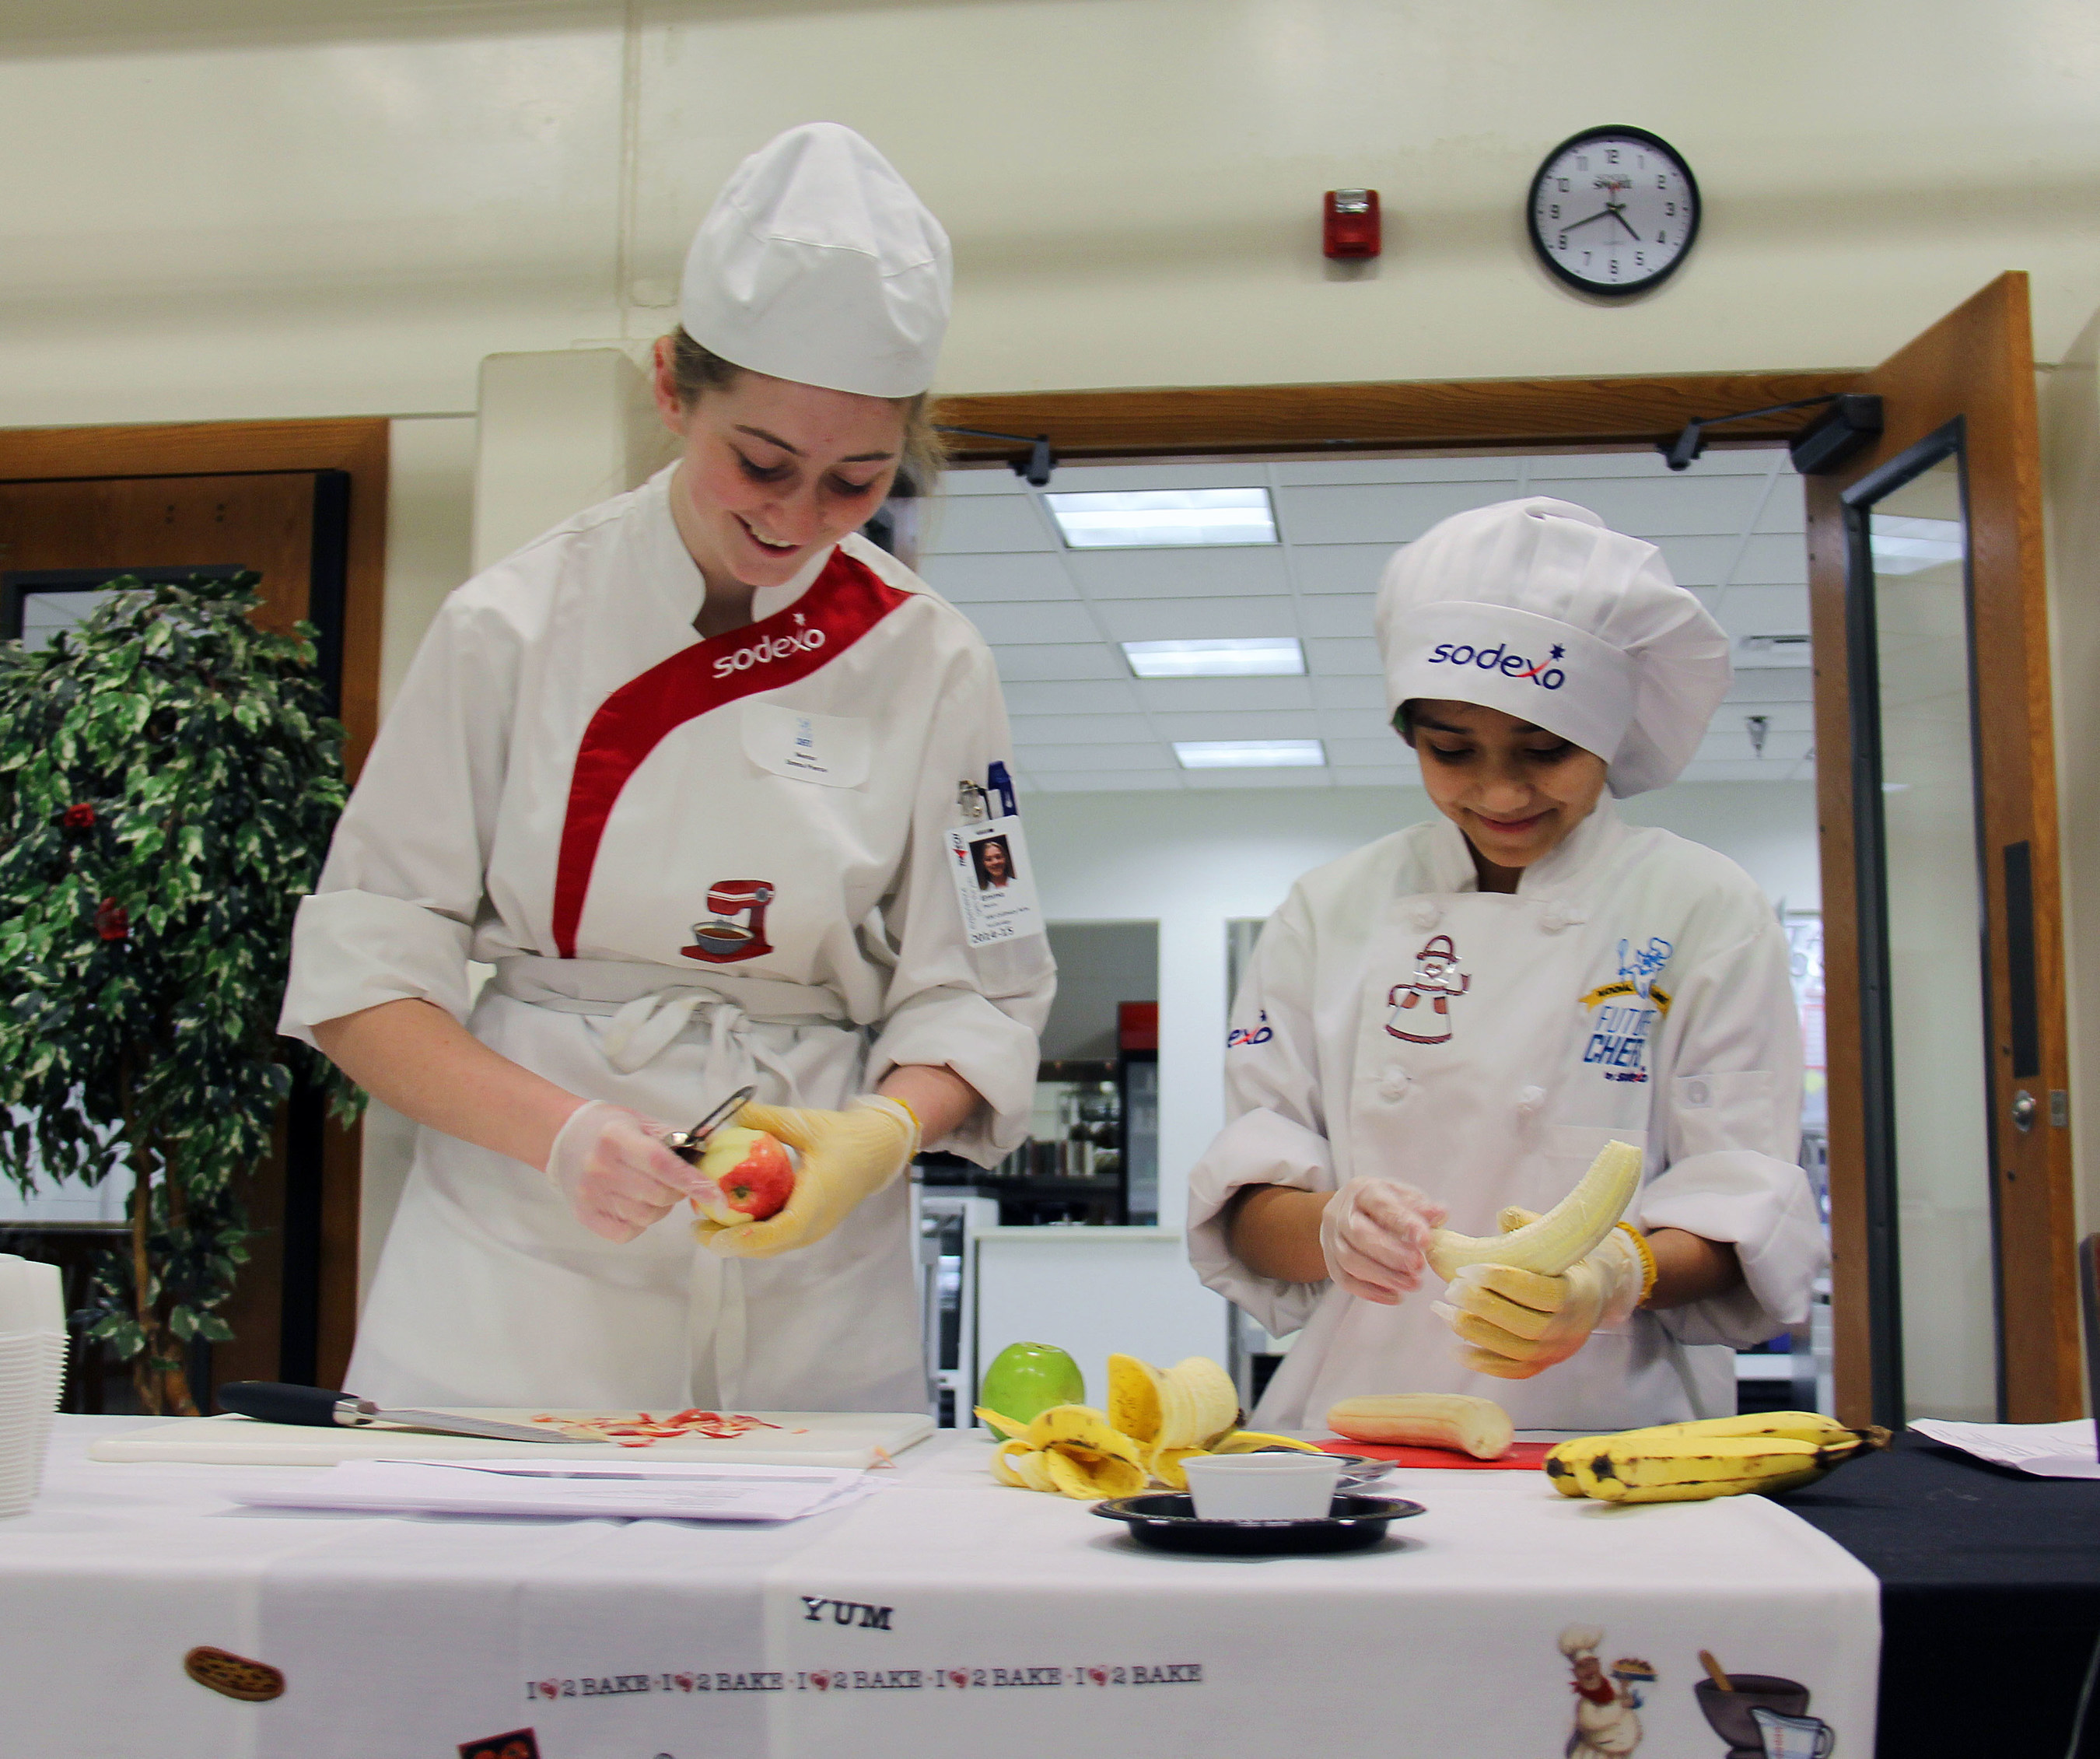 A sodexo chef lends a hand and some culinary guidance to a student at a Sodexo Future Chefs event.